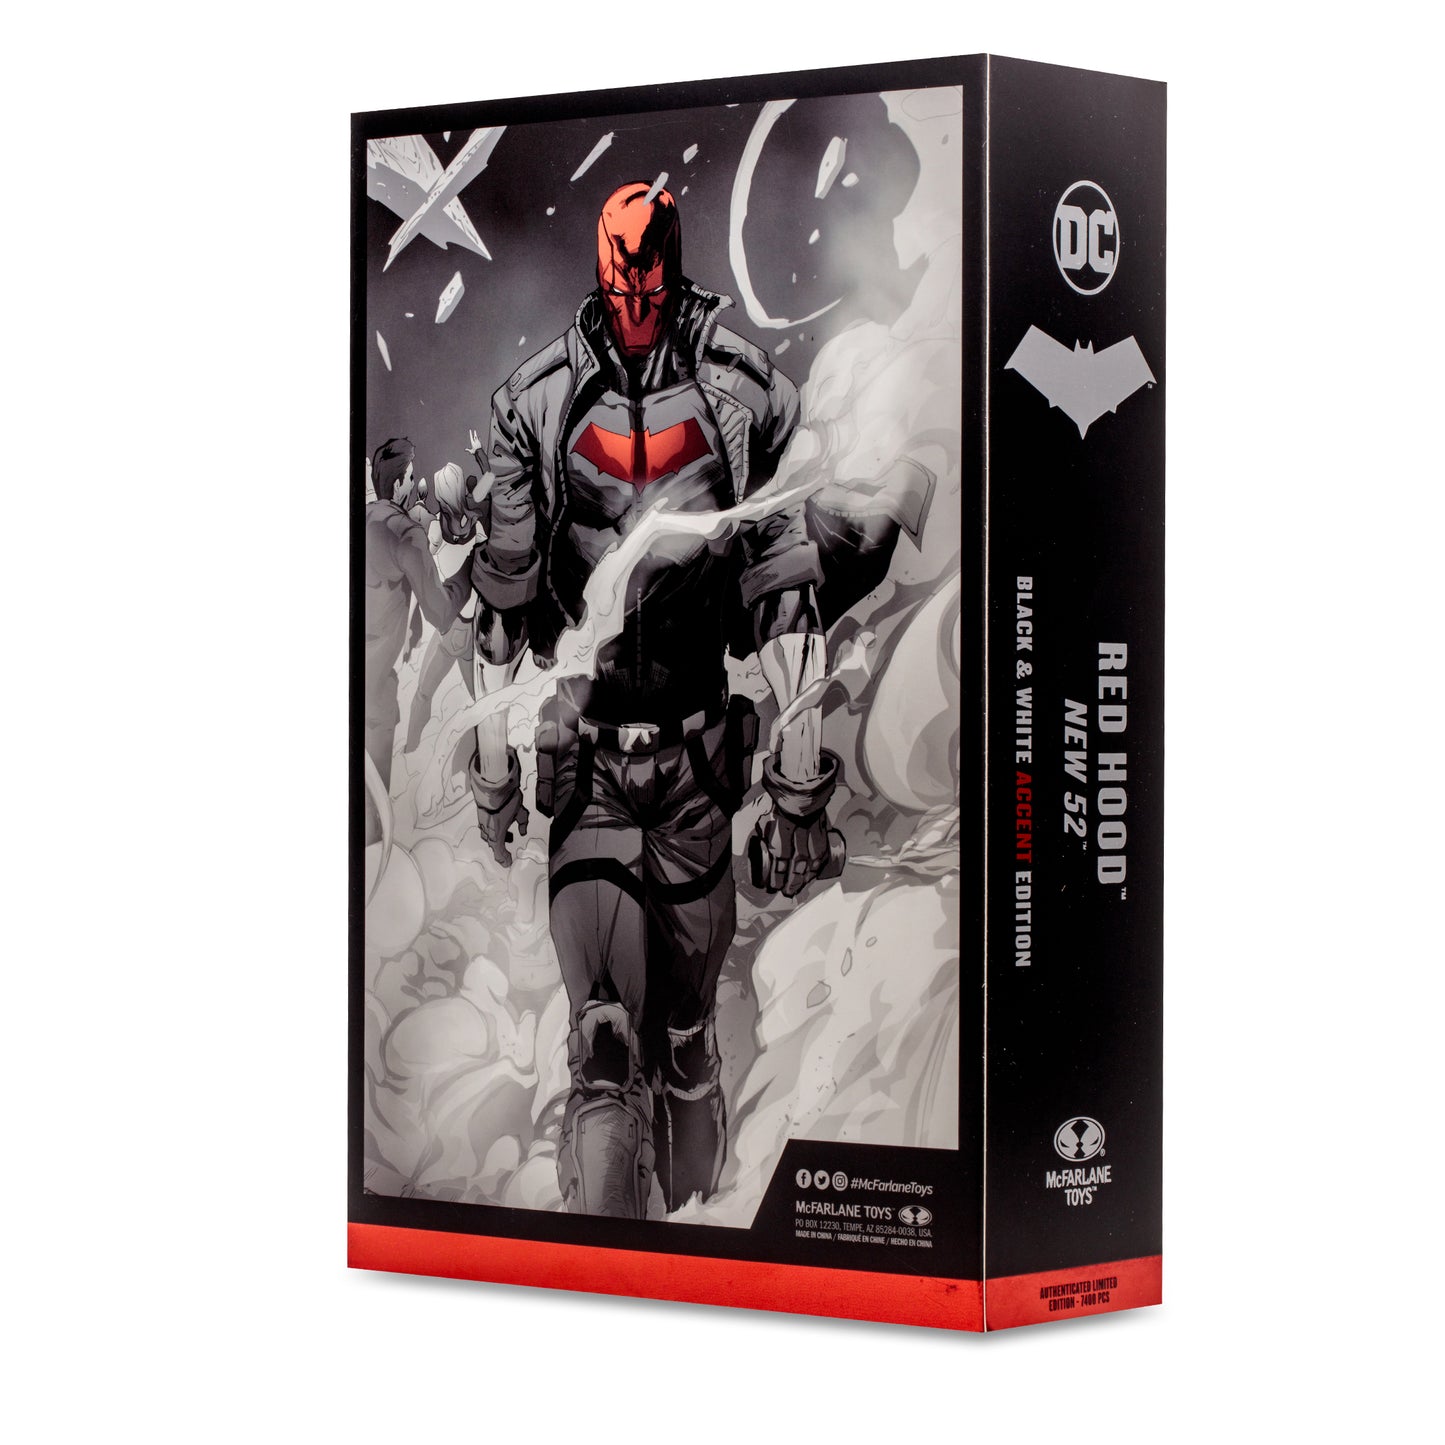 DC MULTIVERSE 7"-GOLD-RED HOOD(NEW 52)(B&W ACCENT)